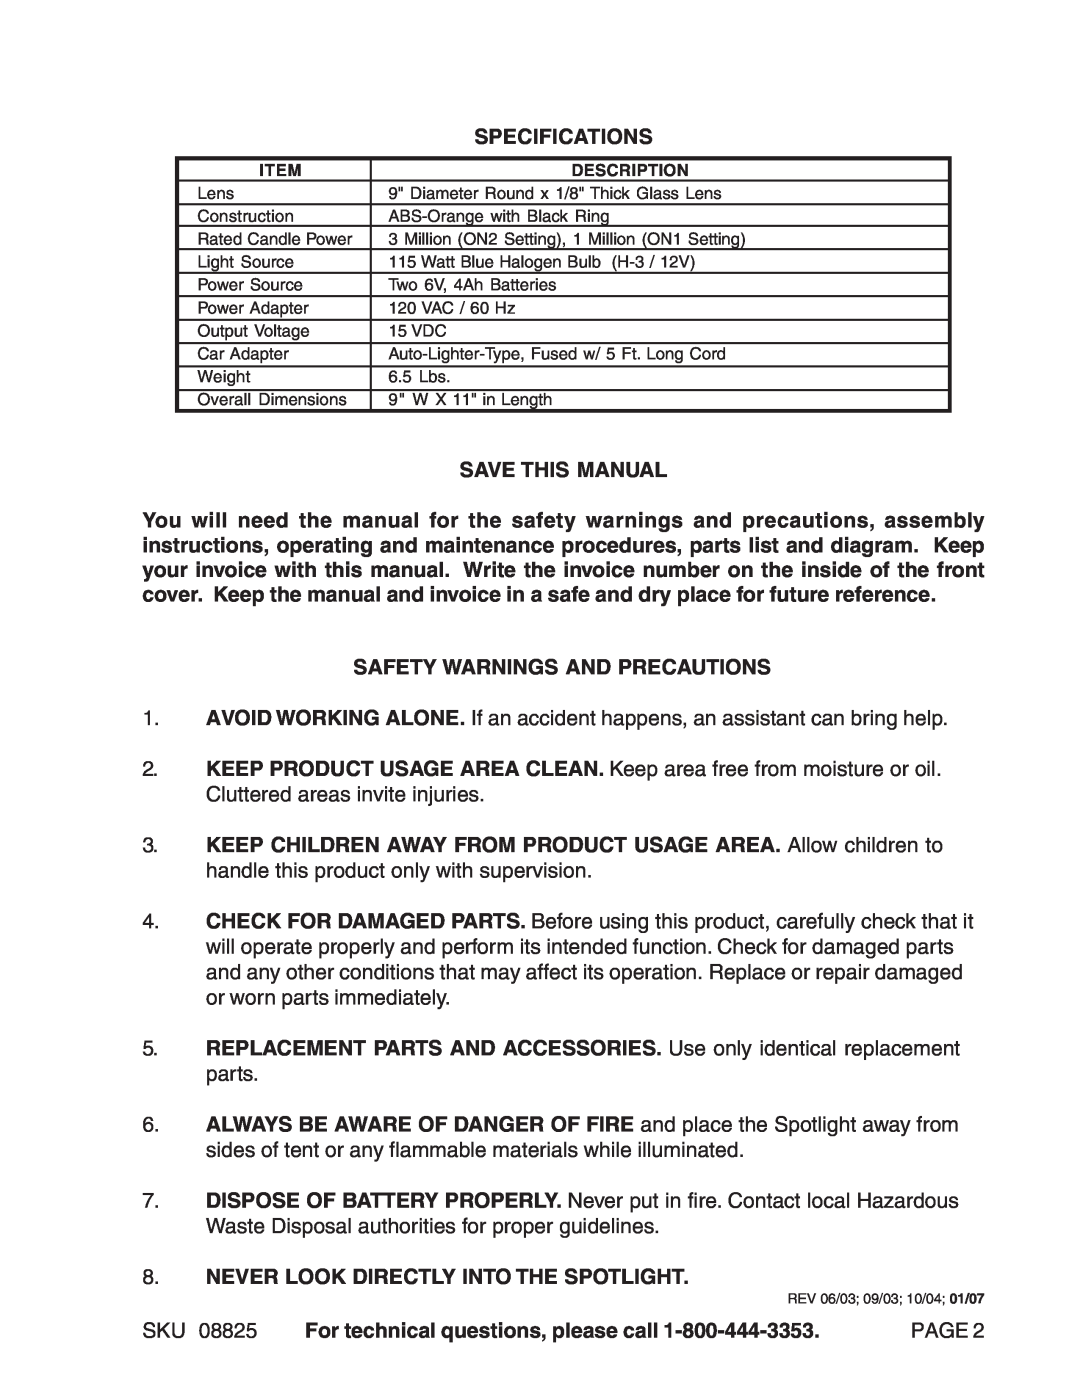 Harbor Freight Tools 08825 manual Specifications, Save This Manual, Safety Warnings And Precautions 